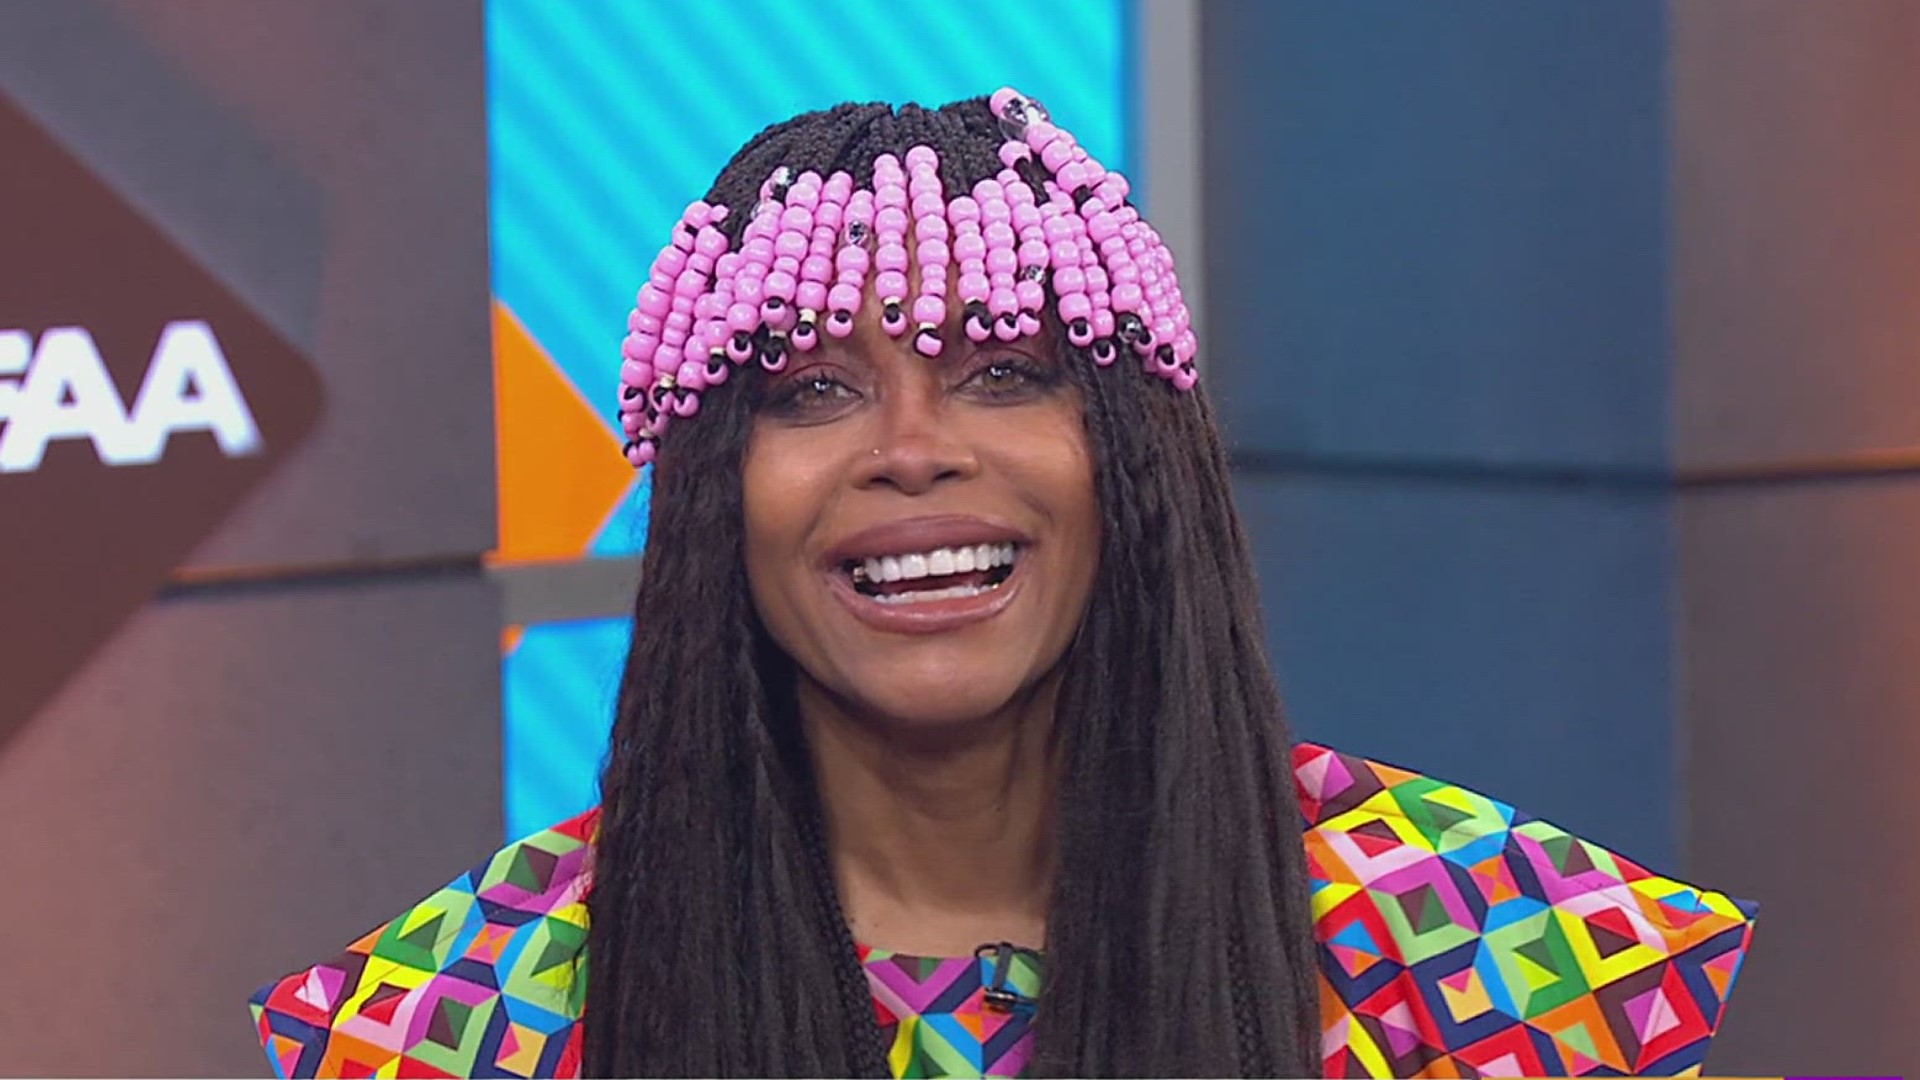 Erykah Badu joins GMT to talk her latest solar return, her face being on DART buses and the guests she's lined up to perform at her February 24 birthday concert.